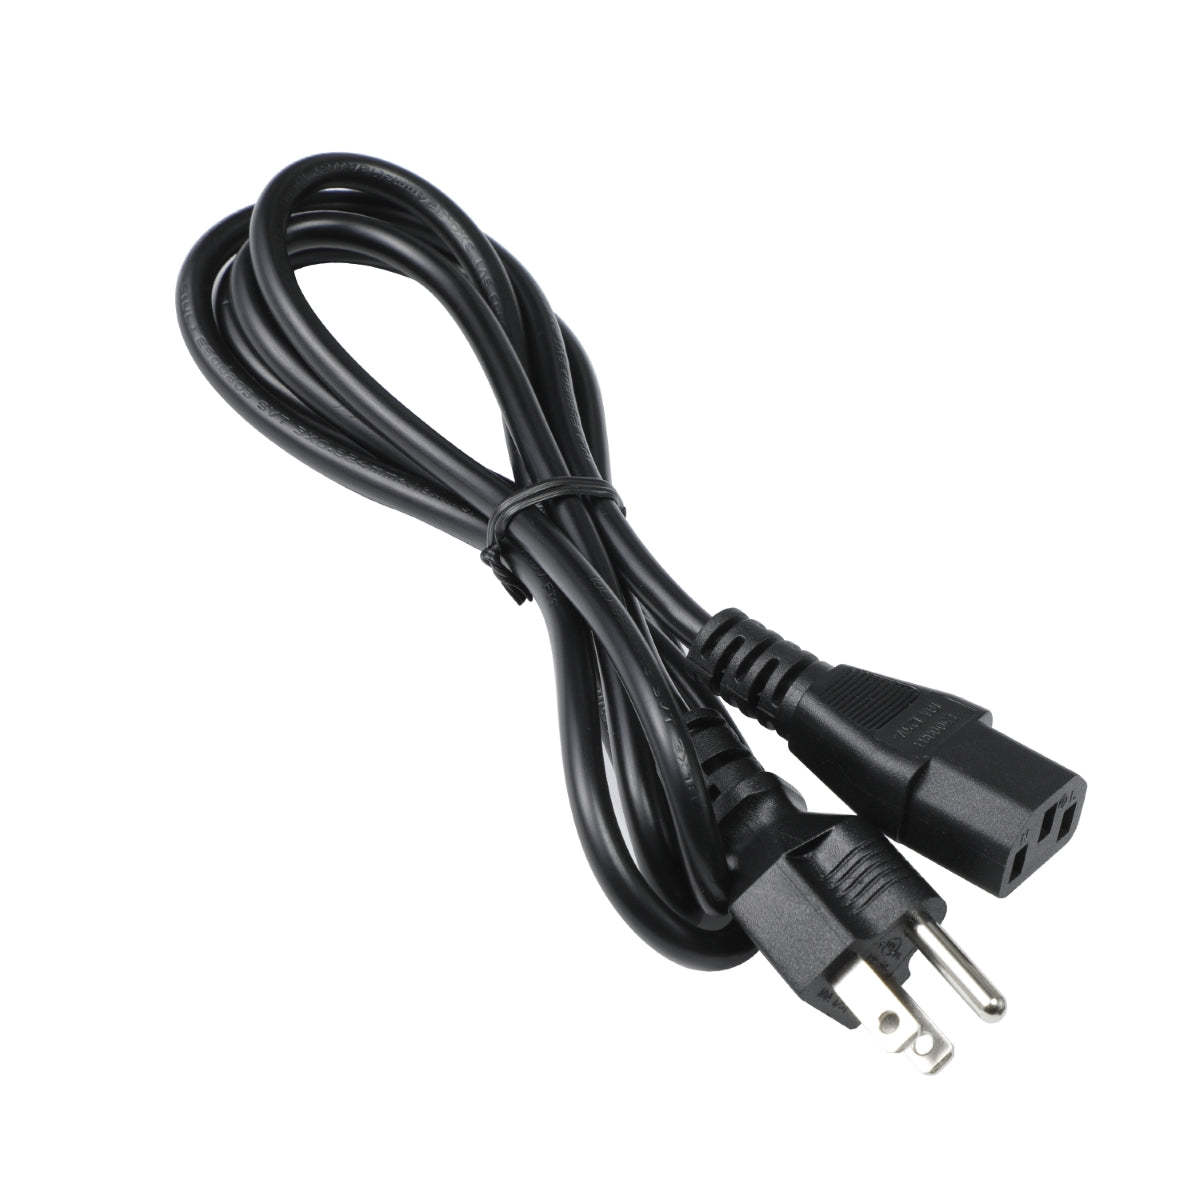 Power Cord for HP VH22 FHD Monitor